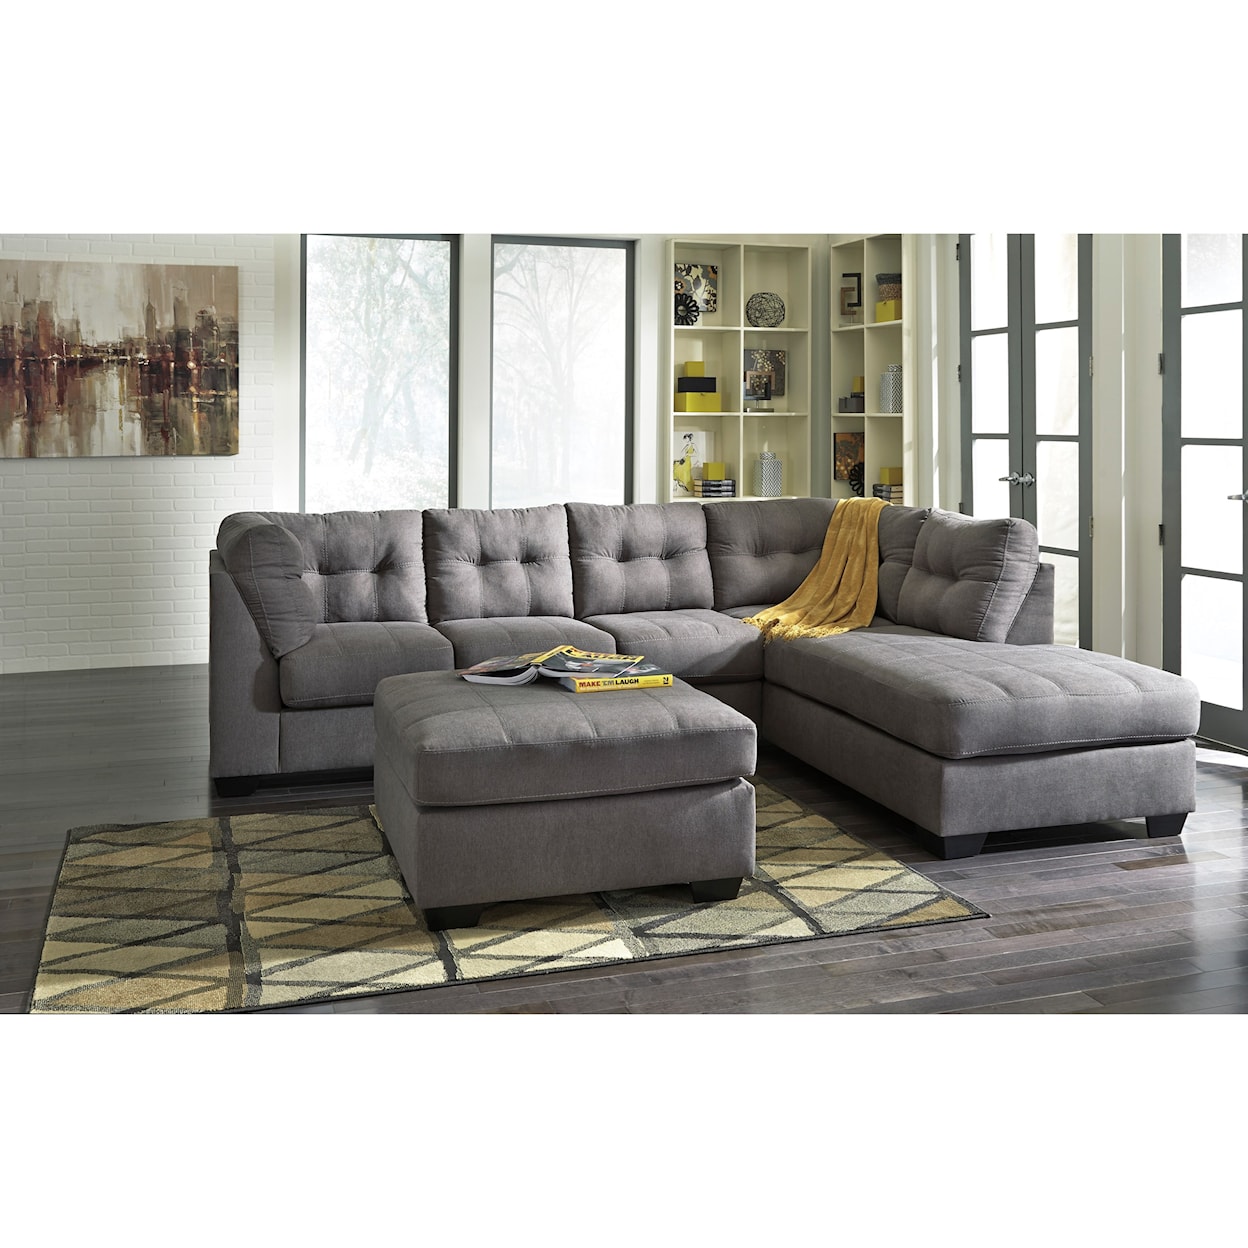 Benchcraft Maier Sectional with Right Arm Facing Chaise